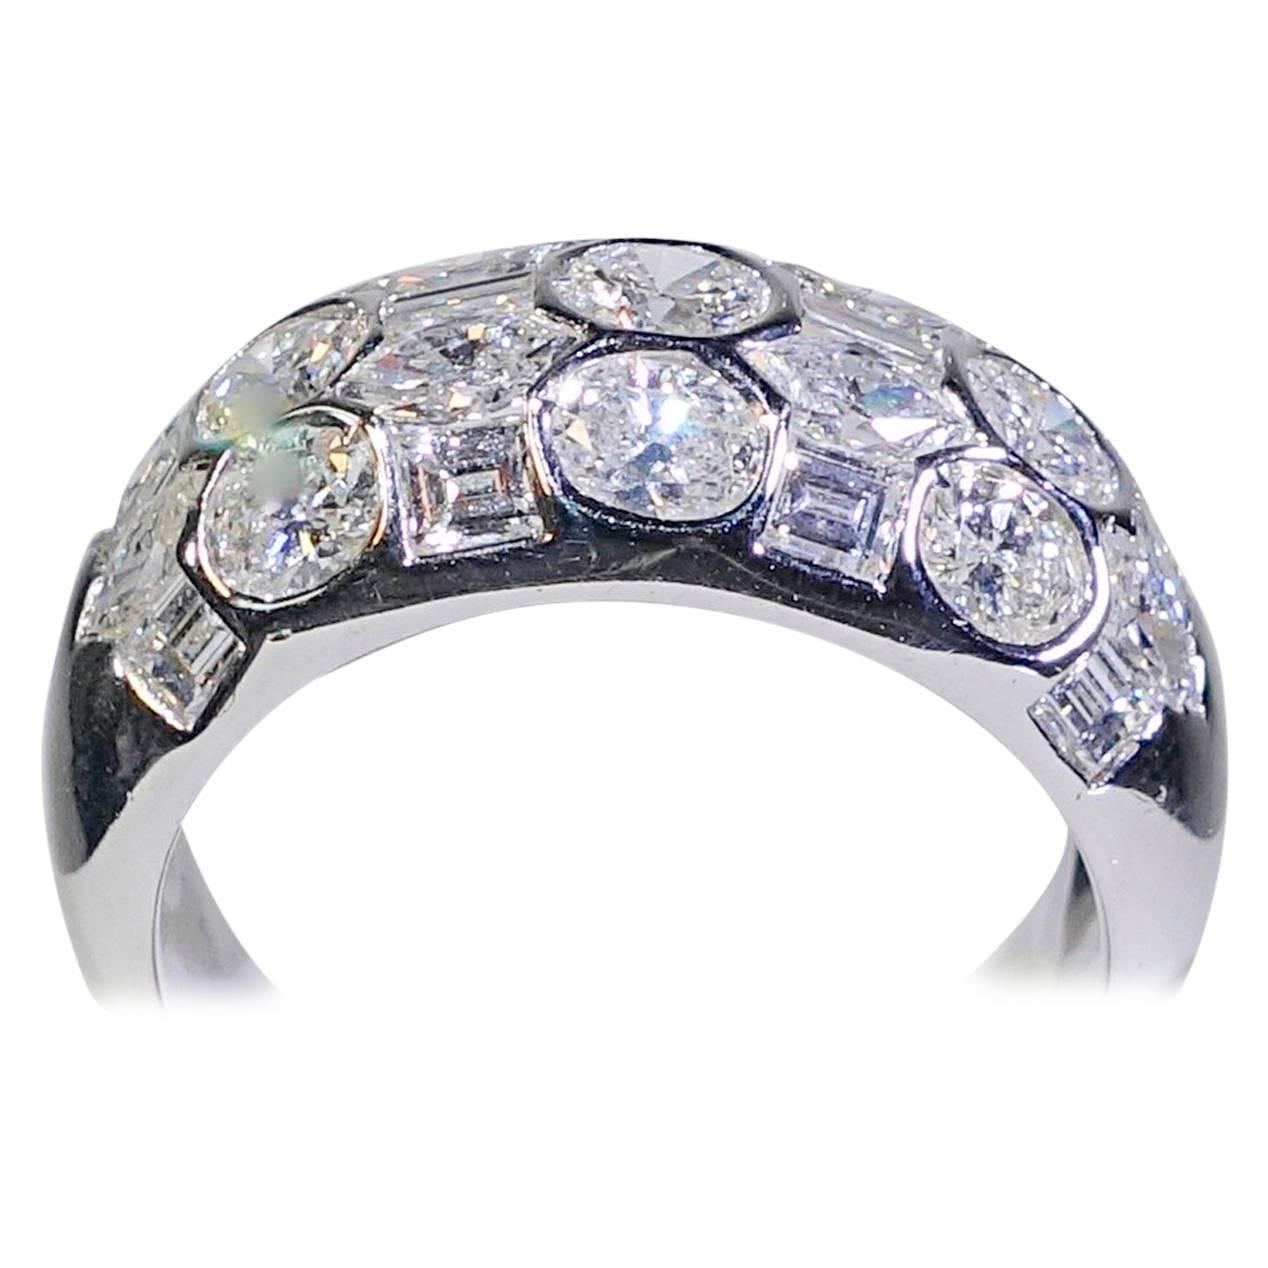 Contemporary Fancy Cut Diamond and 18 Karat White Gold Band Ring